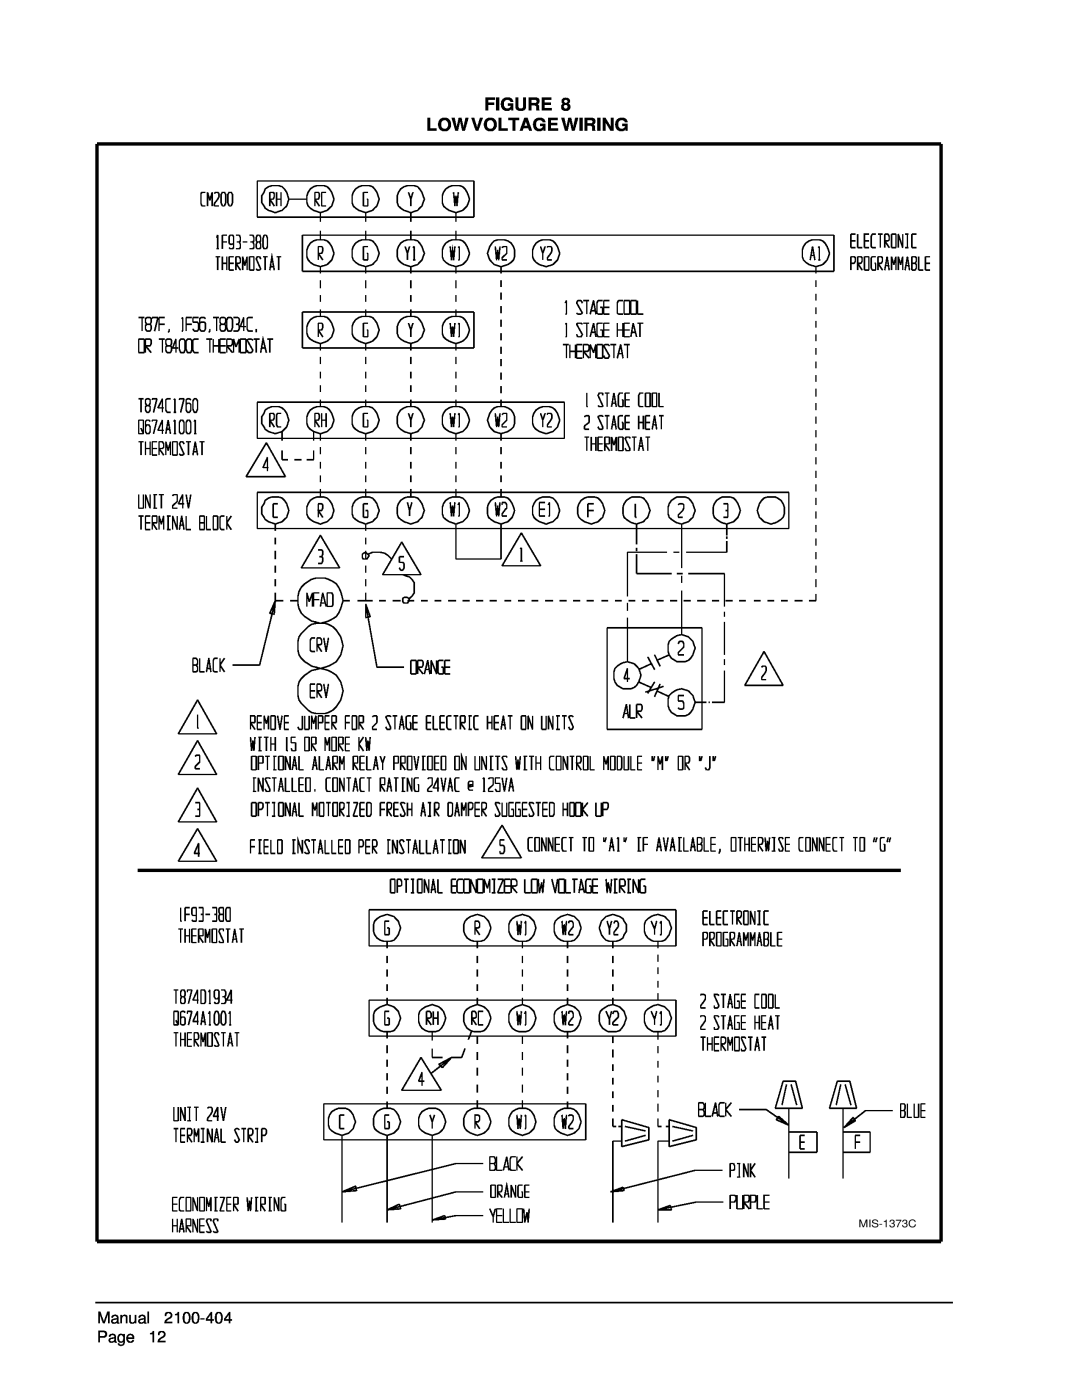 Bard MIS-656 installation instructions Figure Low Voltage Wiring, Manual, 2100-404, Page, MIS-1373C 